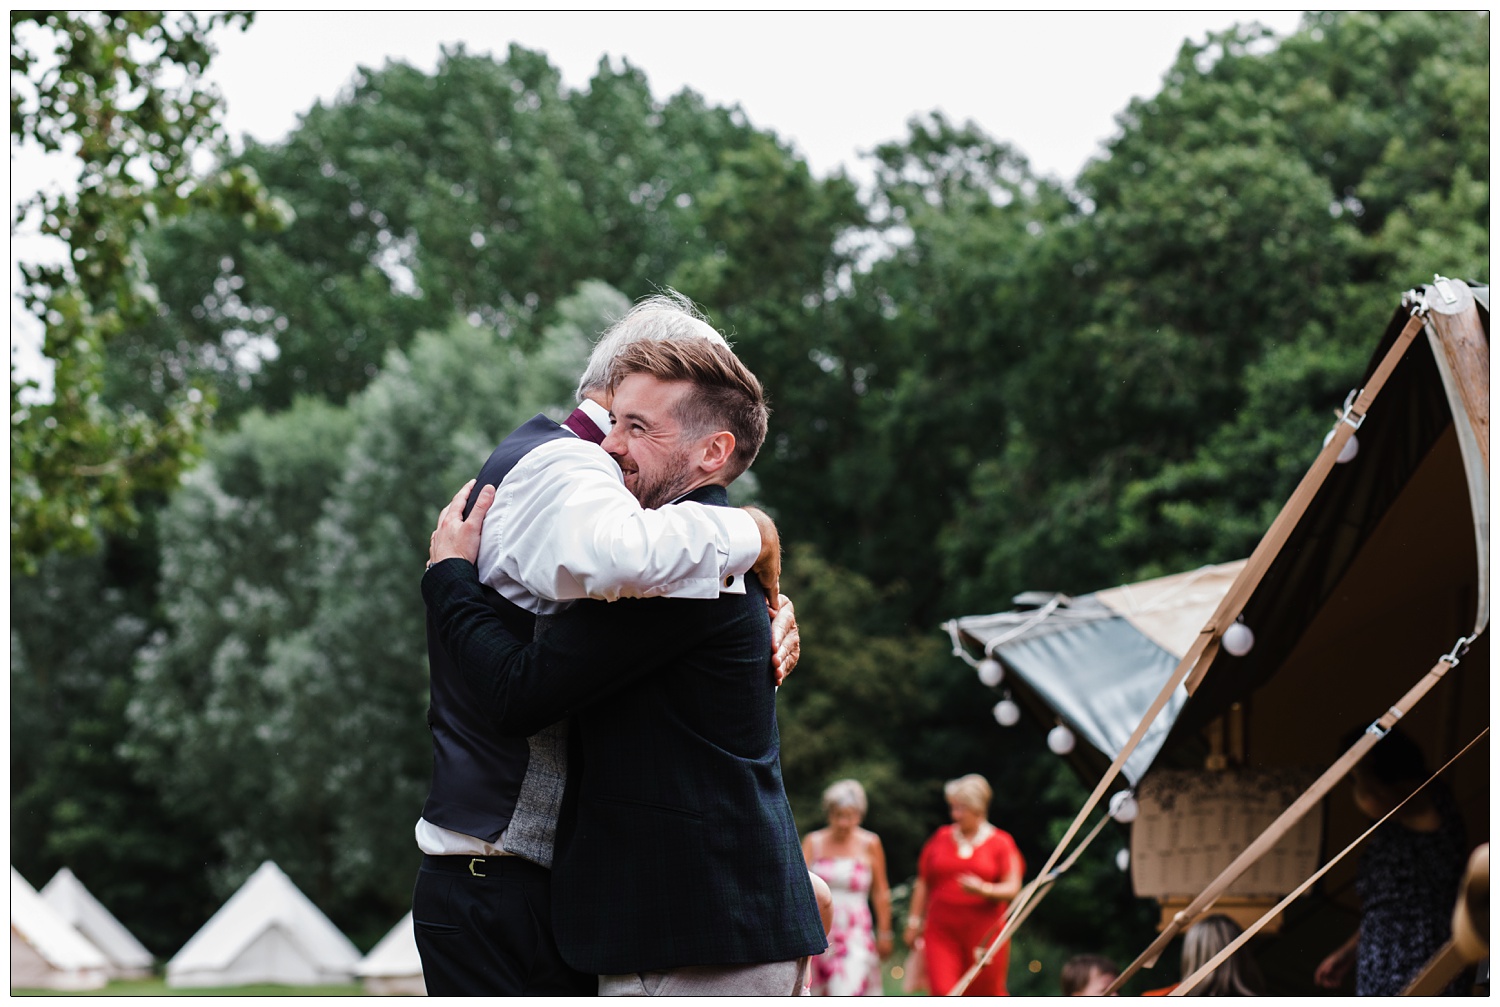 Two men hugging at a wedding. They are outside, there are trees behind them.